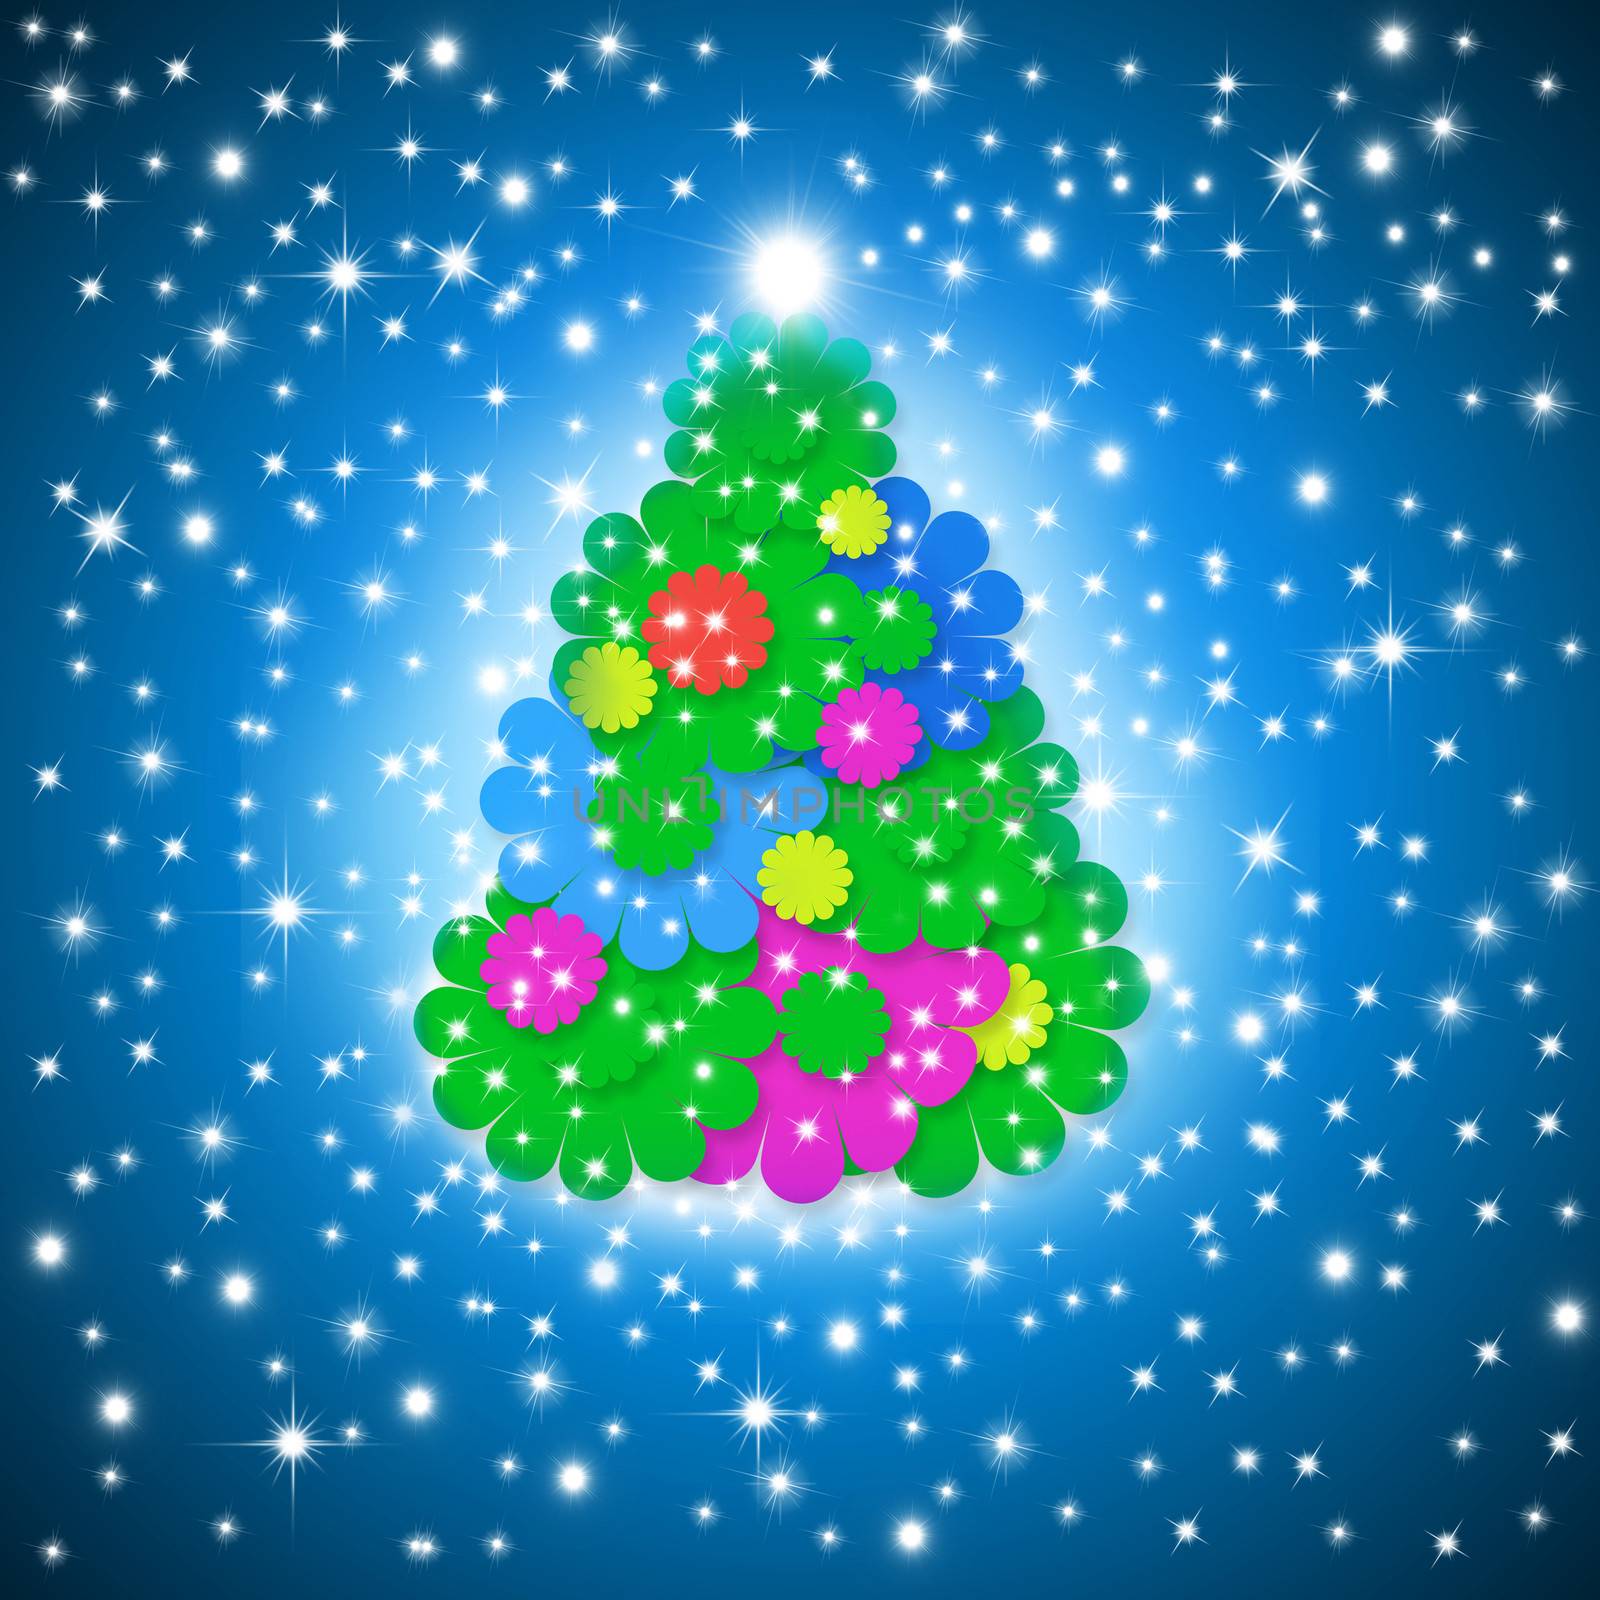 merry christmas card, funny tree multicolored flowers on blue sky background with stars